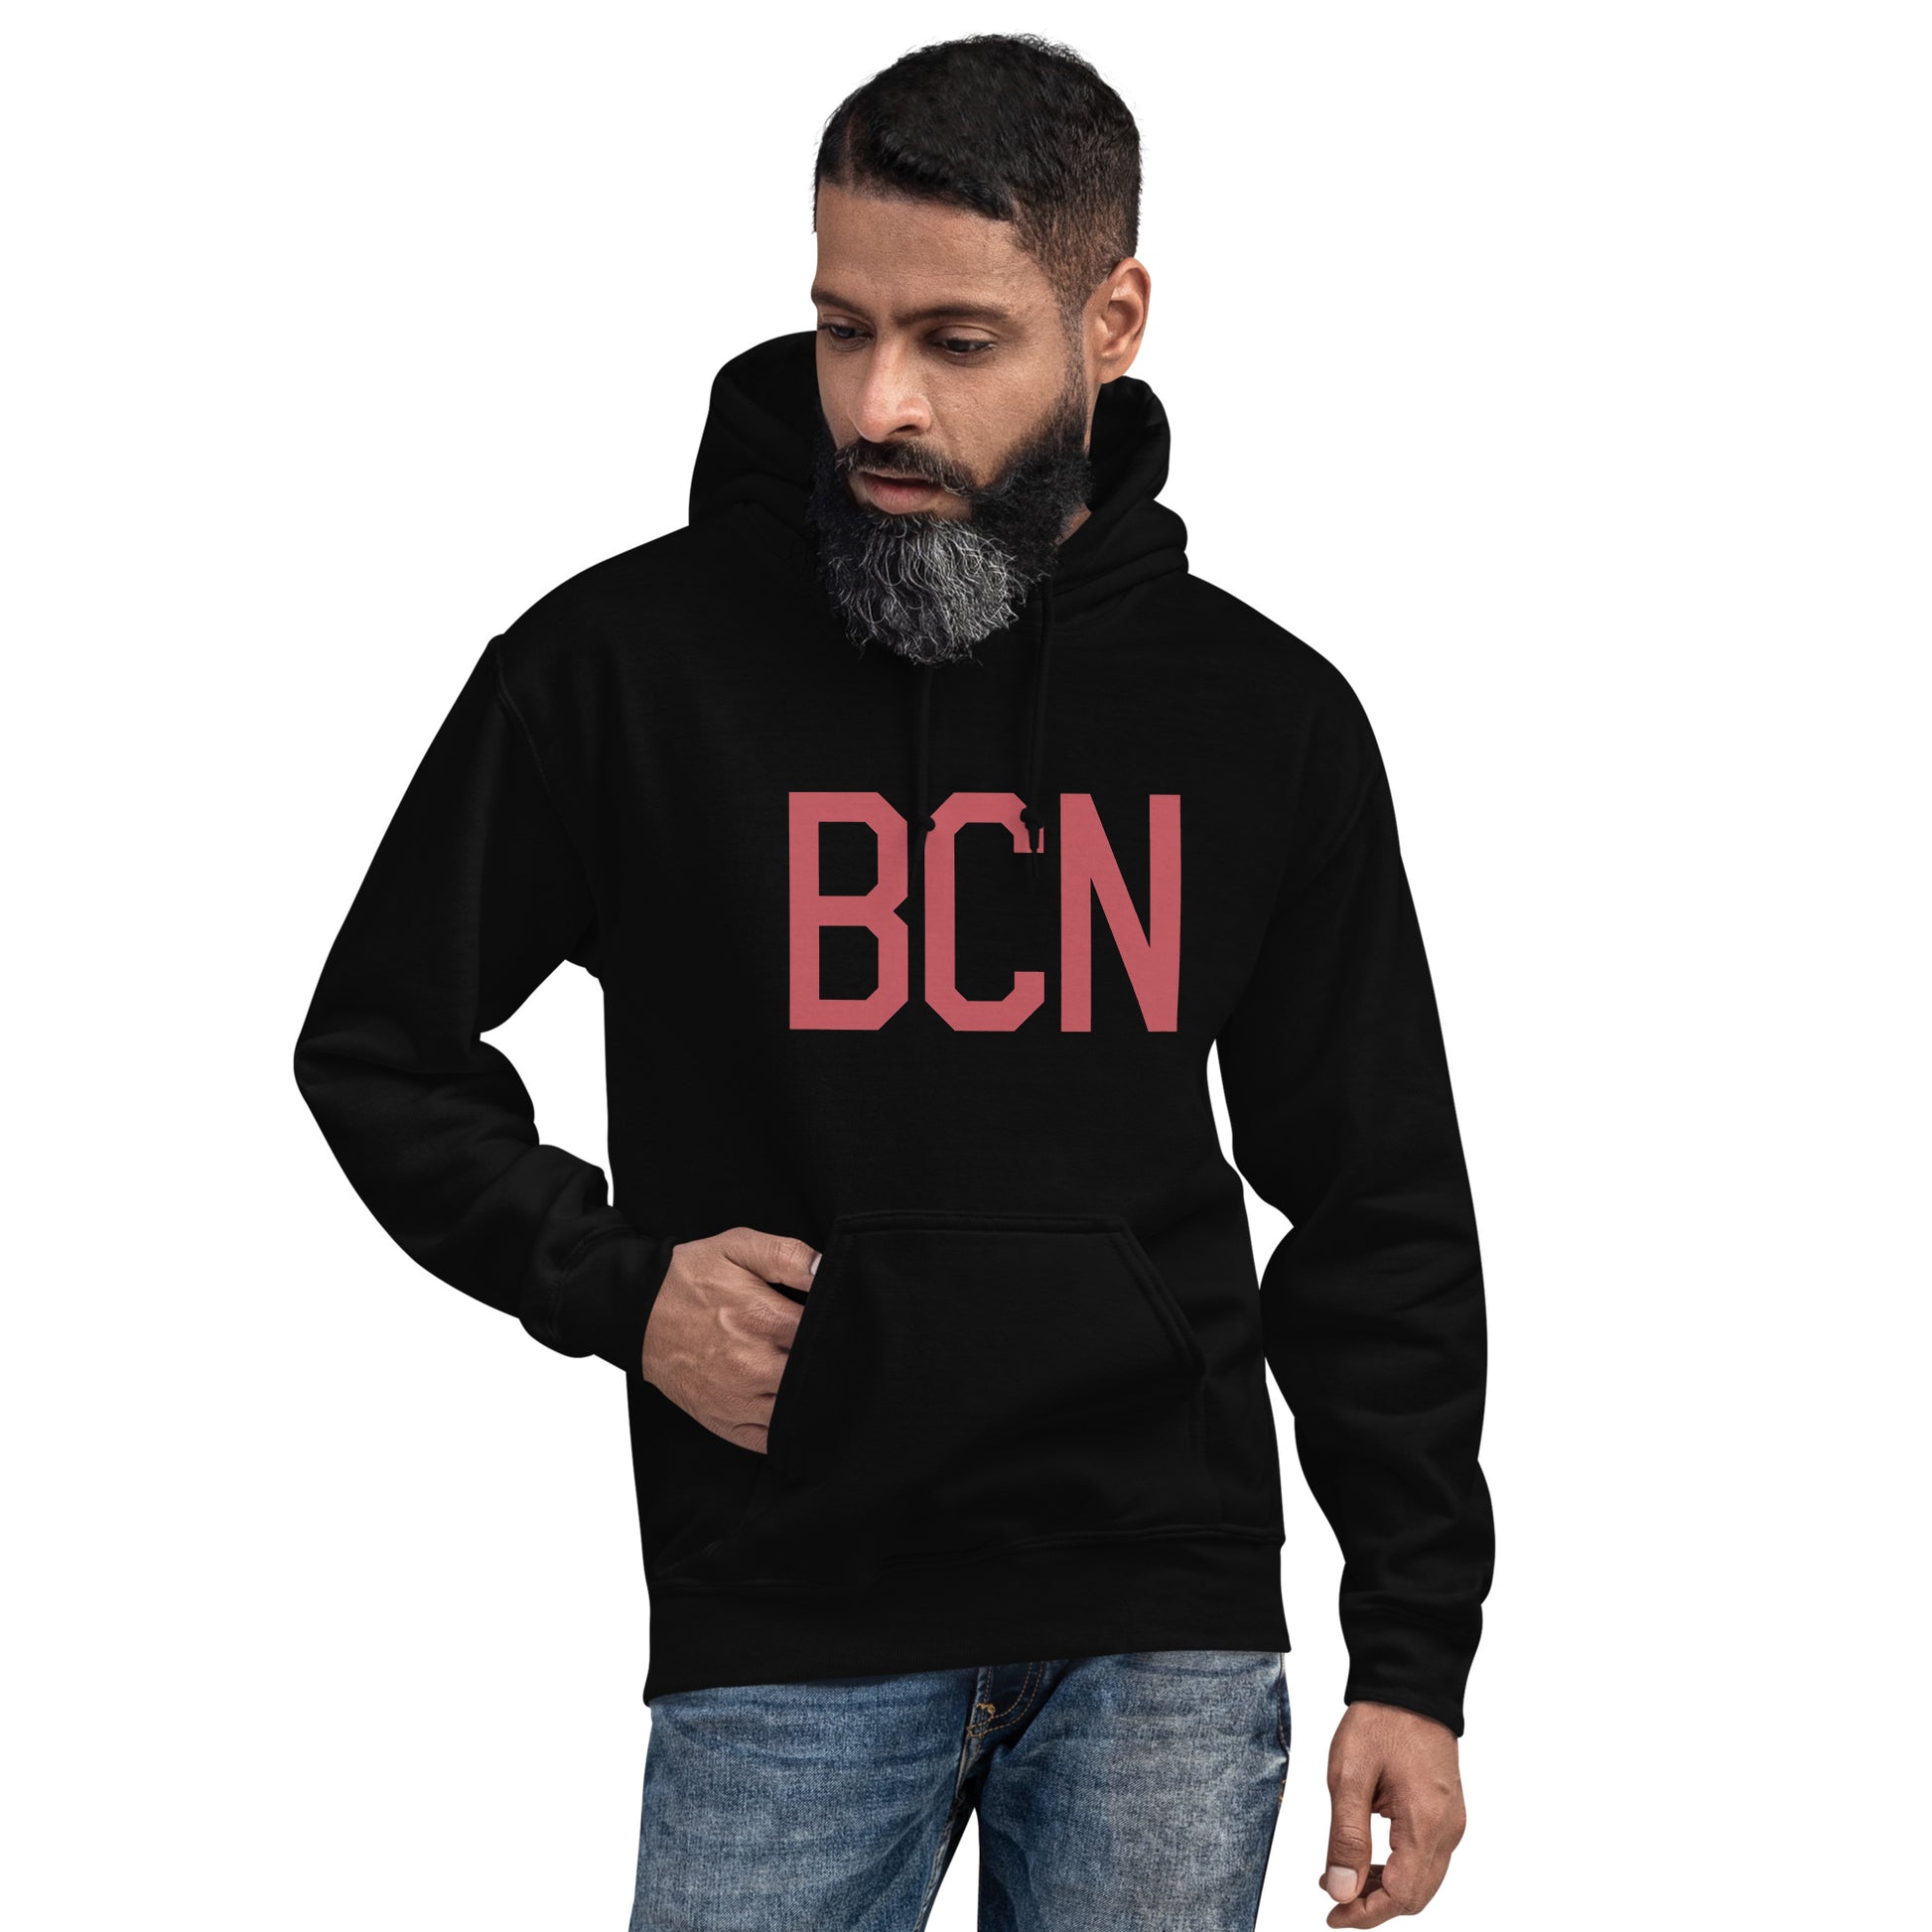 Aviation Enthusiast Hoodie - Deep Pink Graphic • BCN Barcelona • YHM Designs - Image 05